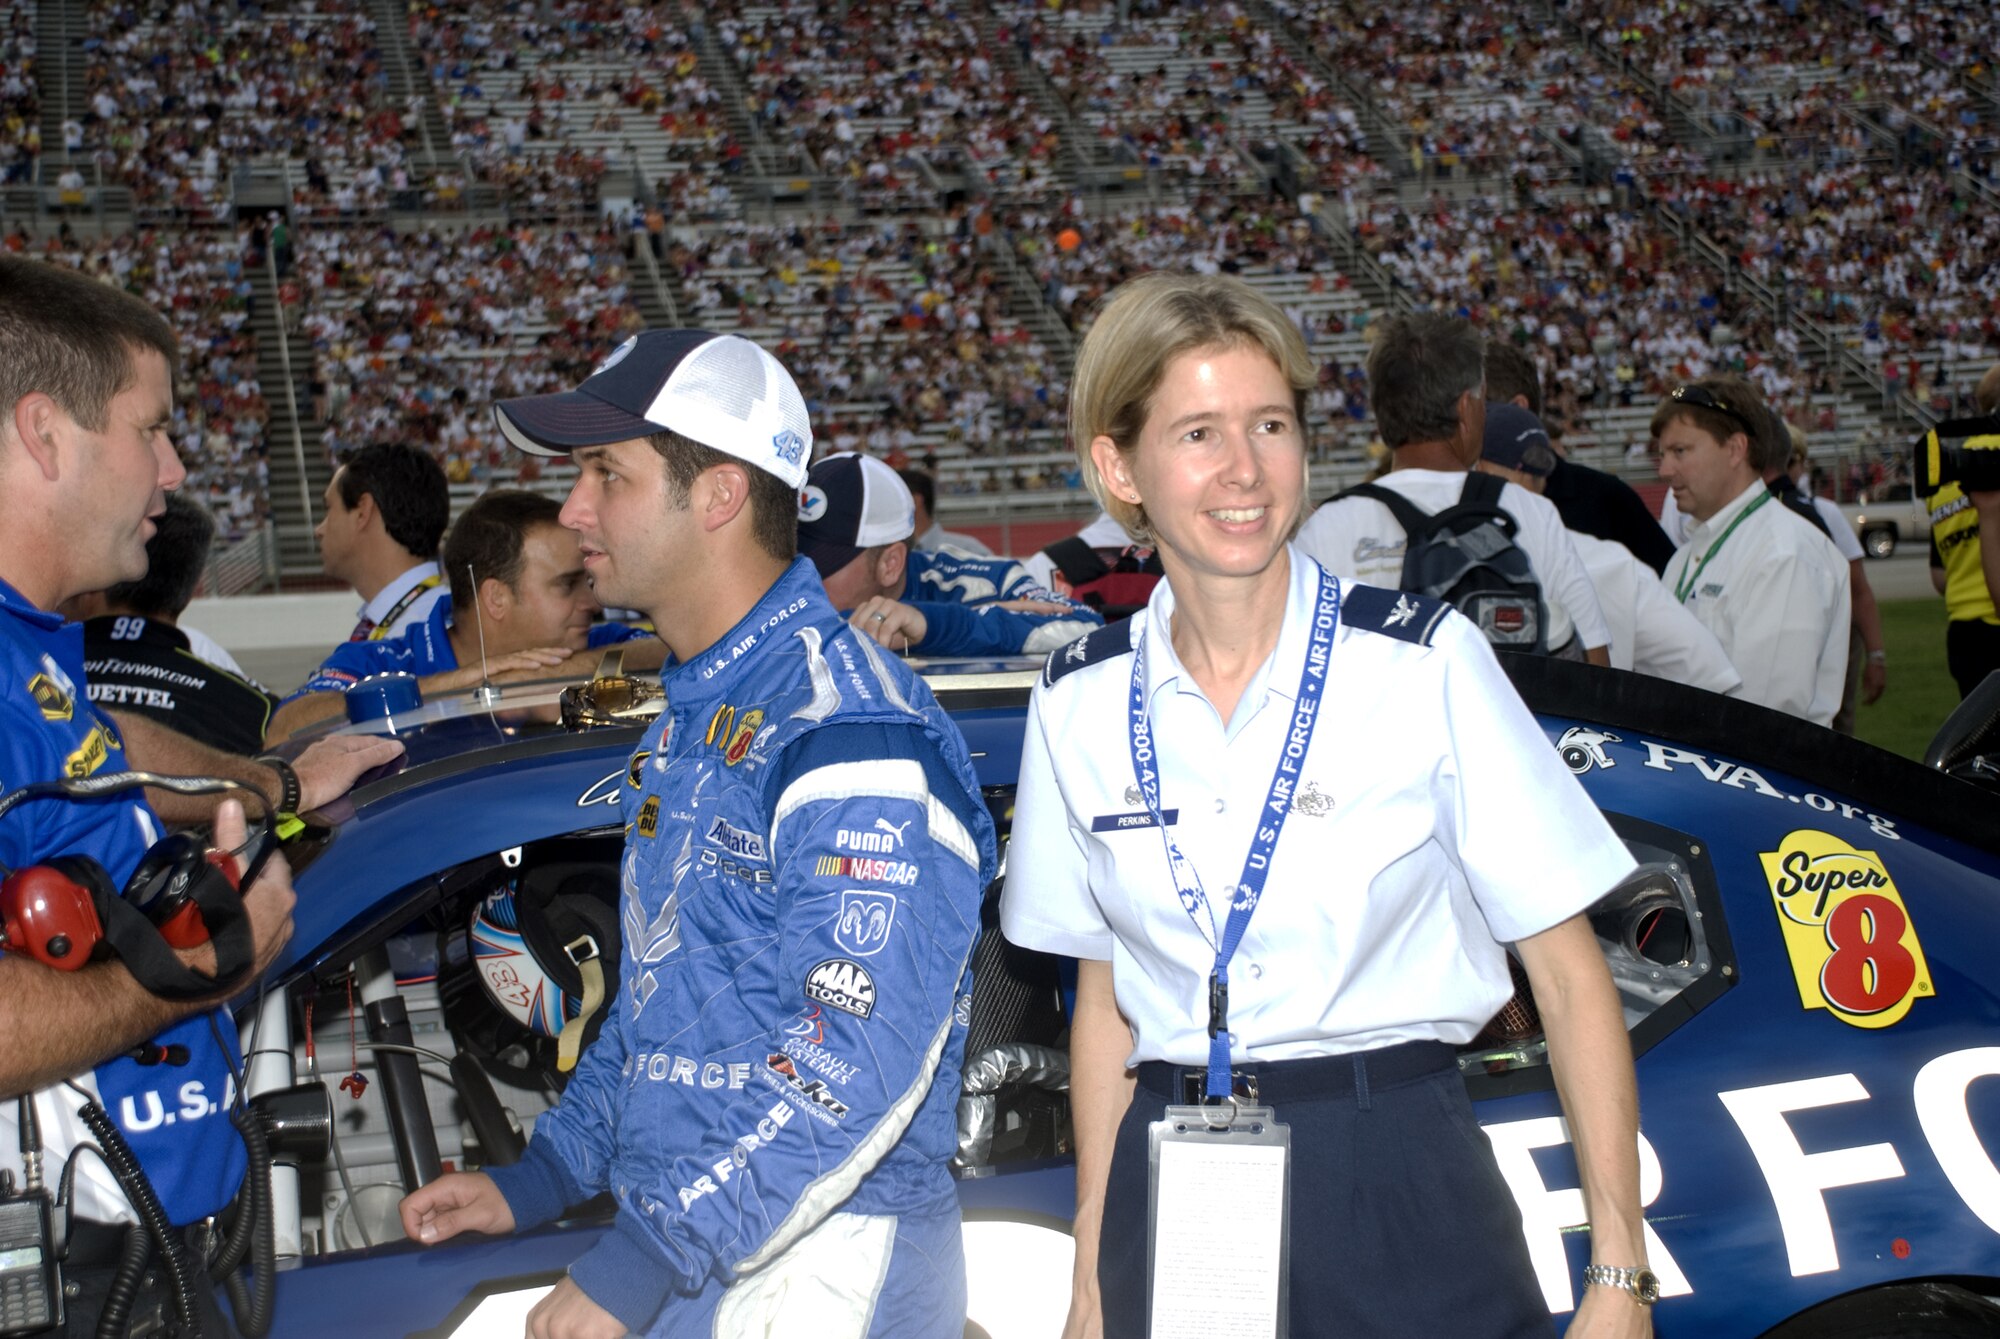 Col. Lee-Ann Perkins, 78th Mission Support Group commander, stands next to NASCAR driver Reed Sorenson at the Pep Boys Auto 500 at the Atlanta Motor Speedway. Colonel Perkins represented the Air Force at the race. Courtesy photo